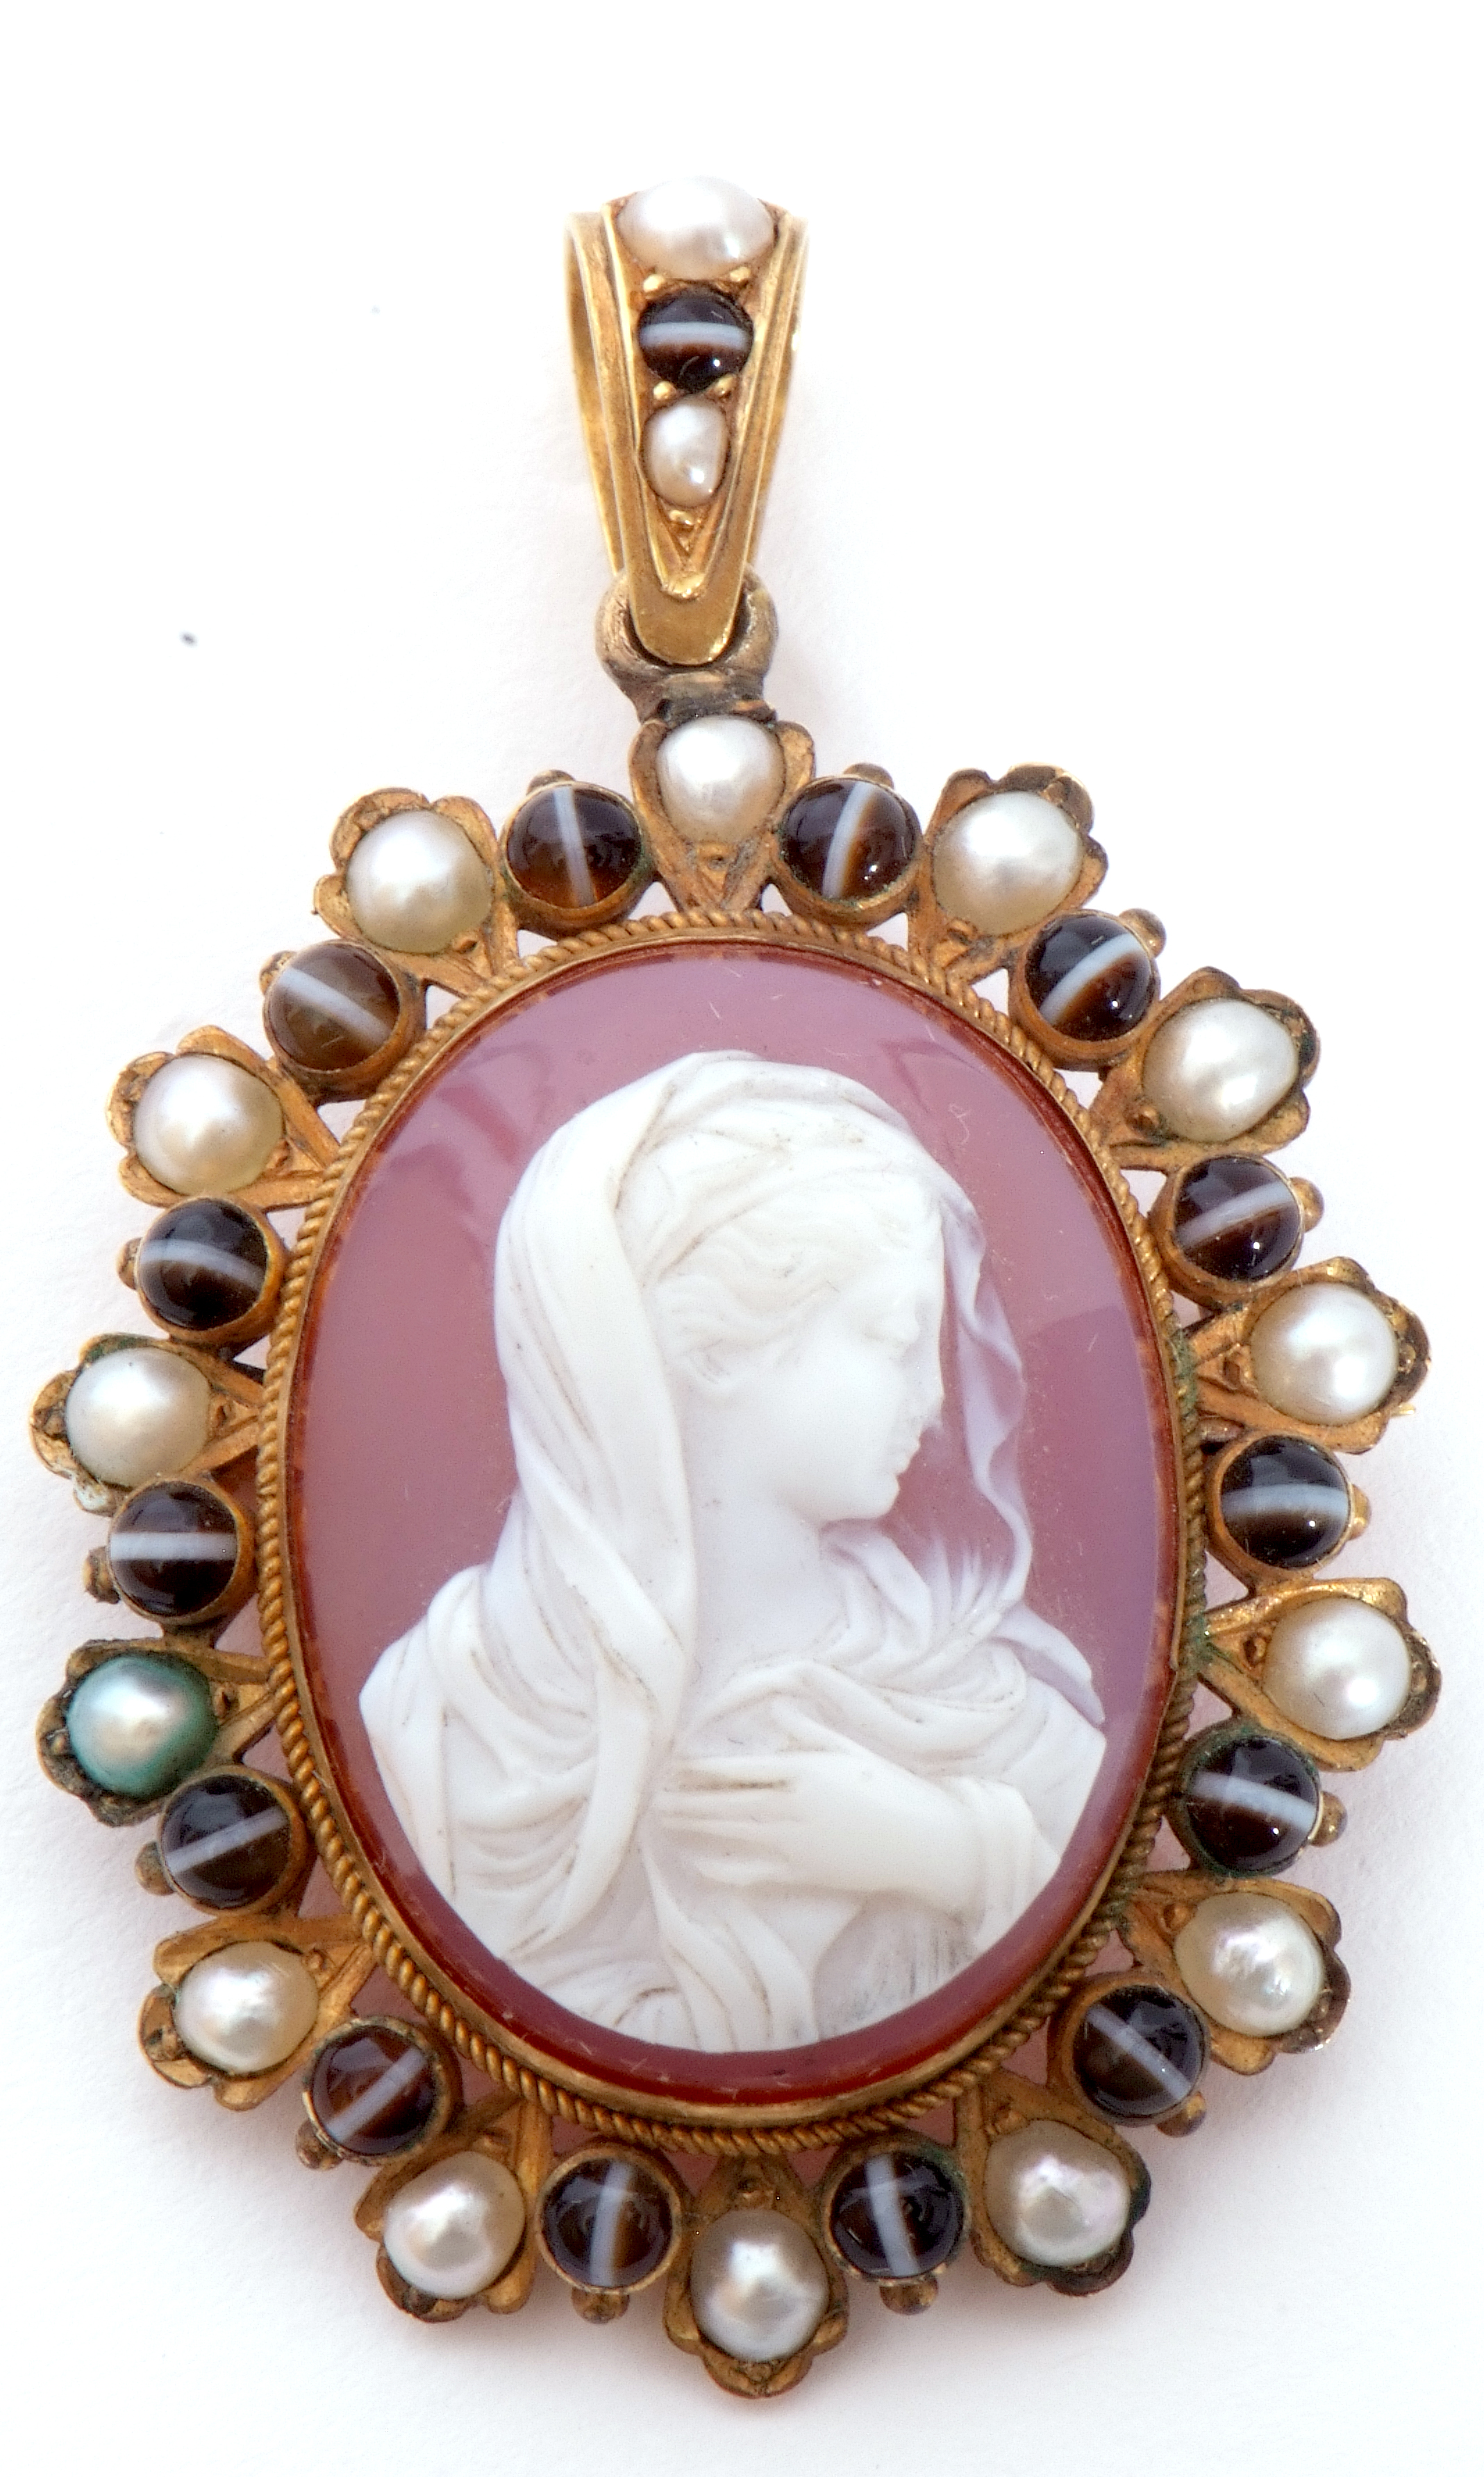 Victorian hardstone cameo pendant depicting a veiled lady carved in high relief, 25 x 20mm in a - Image 2 of 4